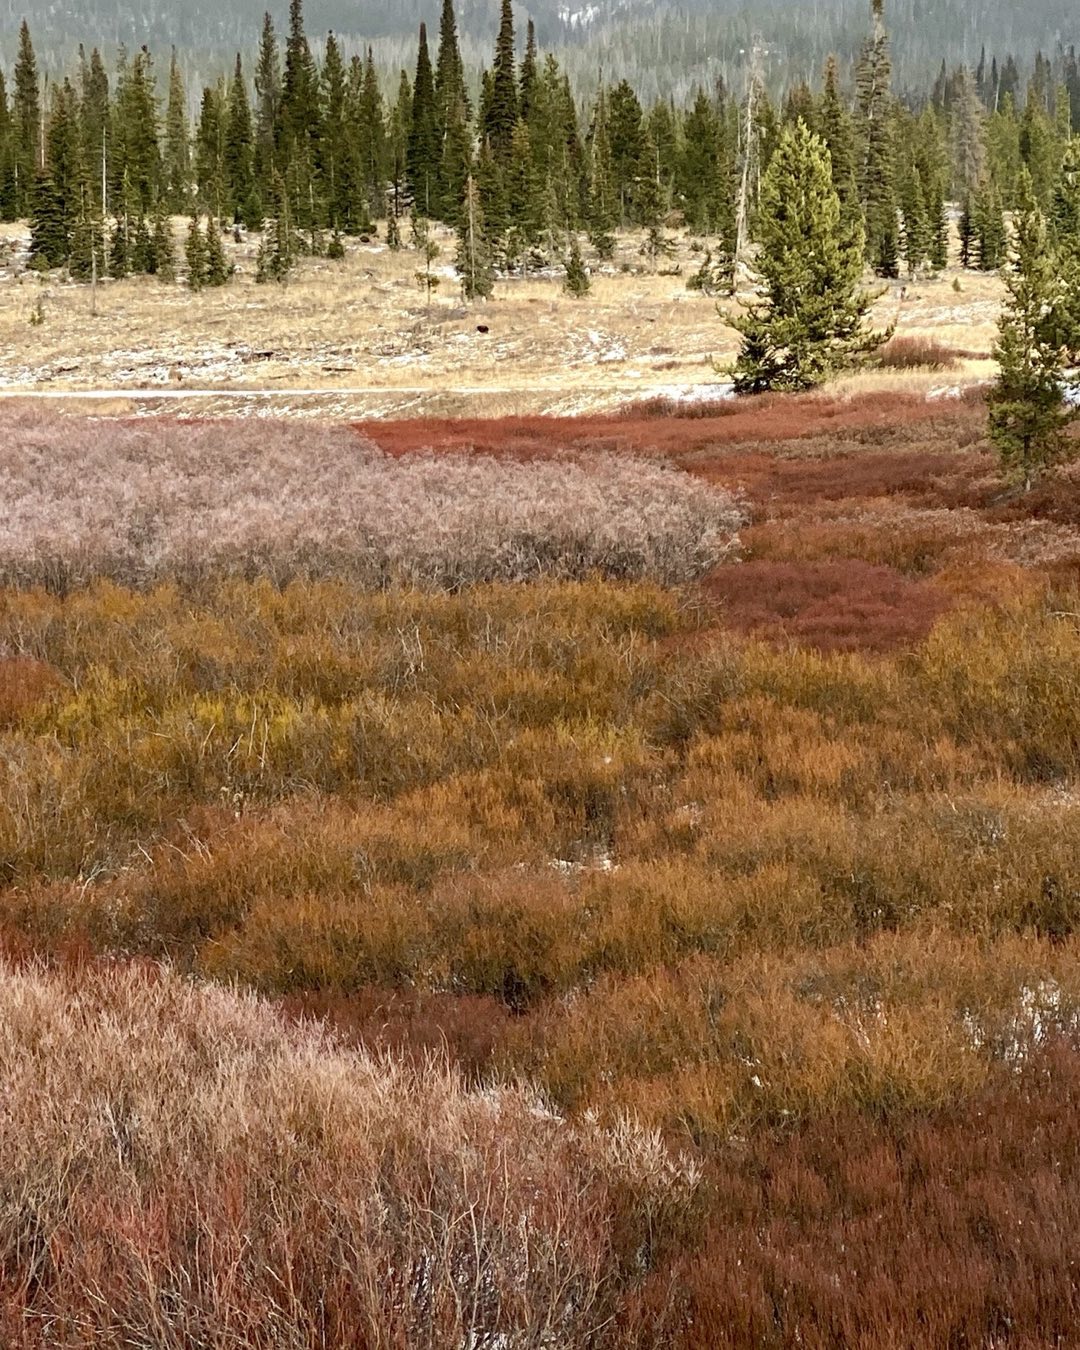 Driving from Dubois, WY towards Togwotee Pass after a light snowfall, the sun, diffused by the thin overcast, illuminated these low wetland plants with their magnificent fall colors. #togwoteepass #wyomingfallcolor #earlyfallsnowstorm #orcuttphotography #autumncolor #autumnnaturephotography